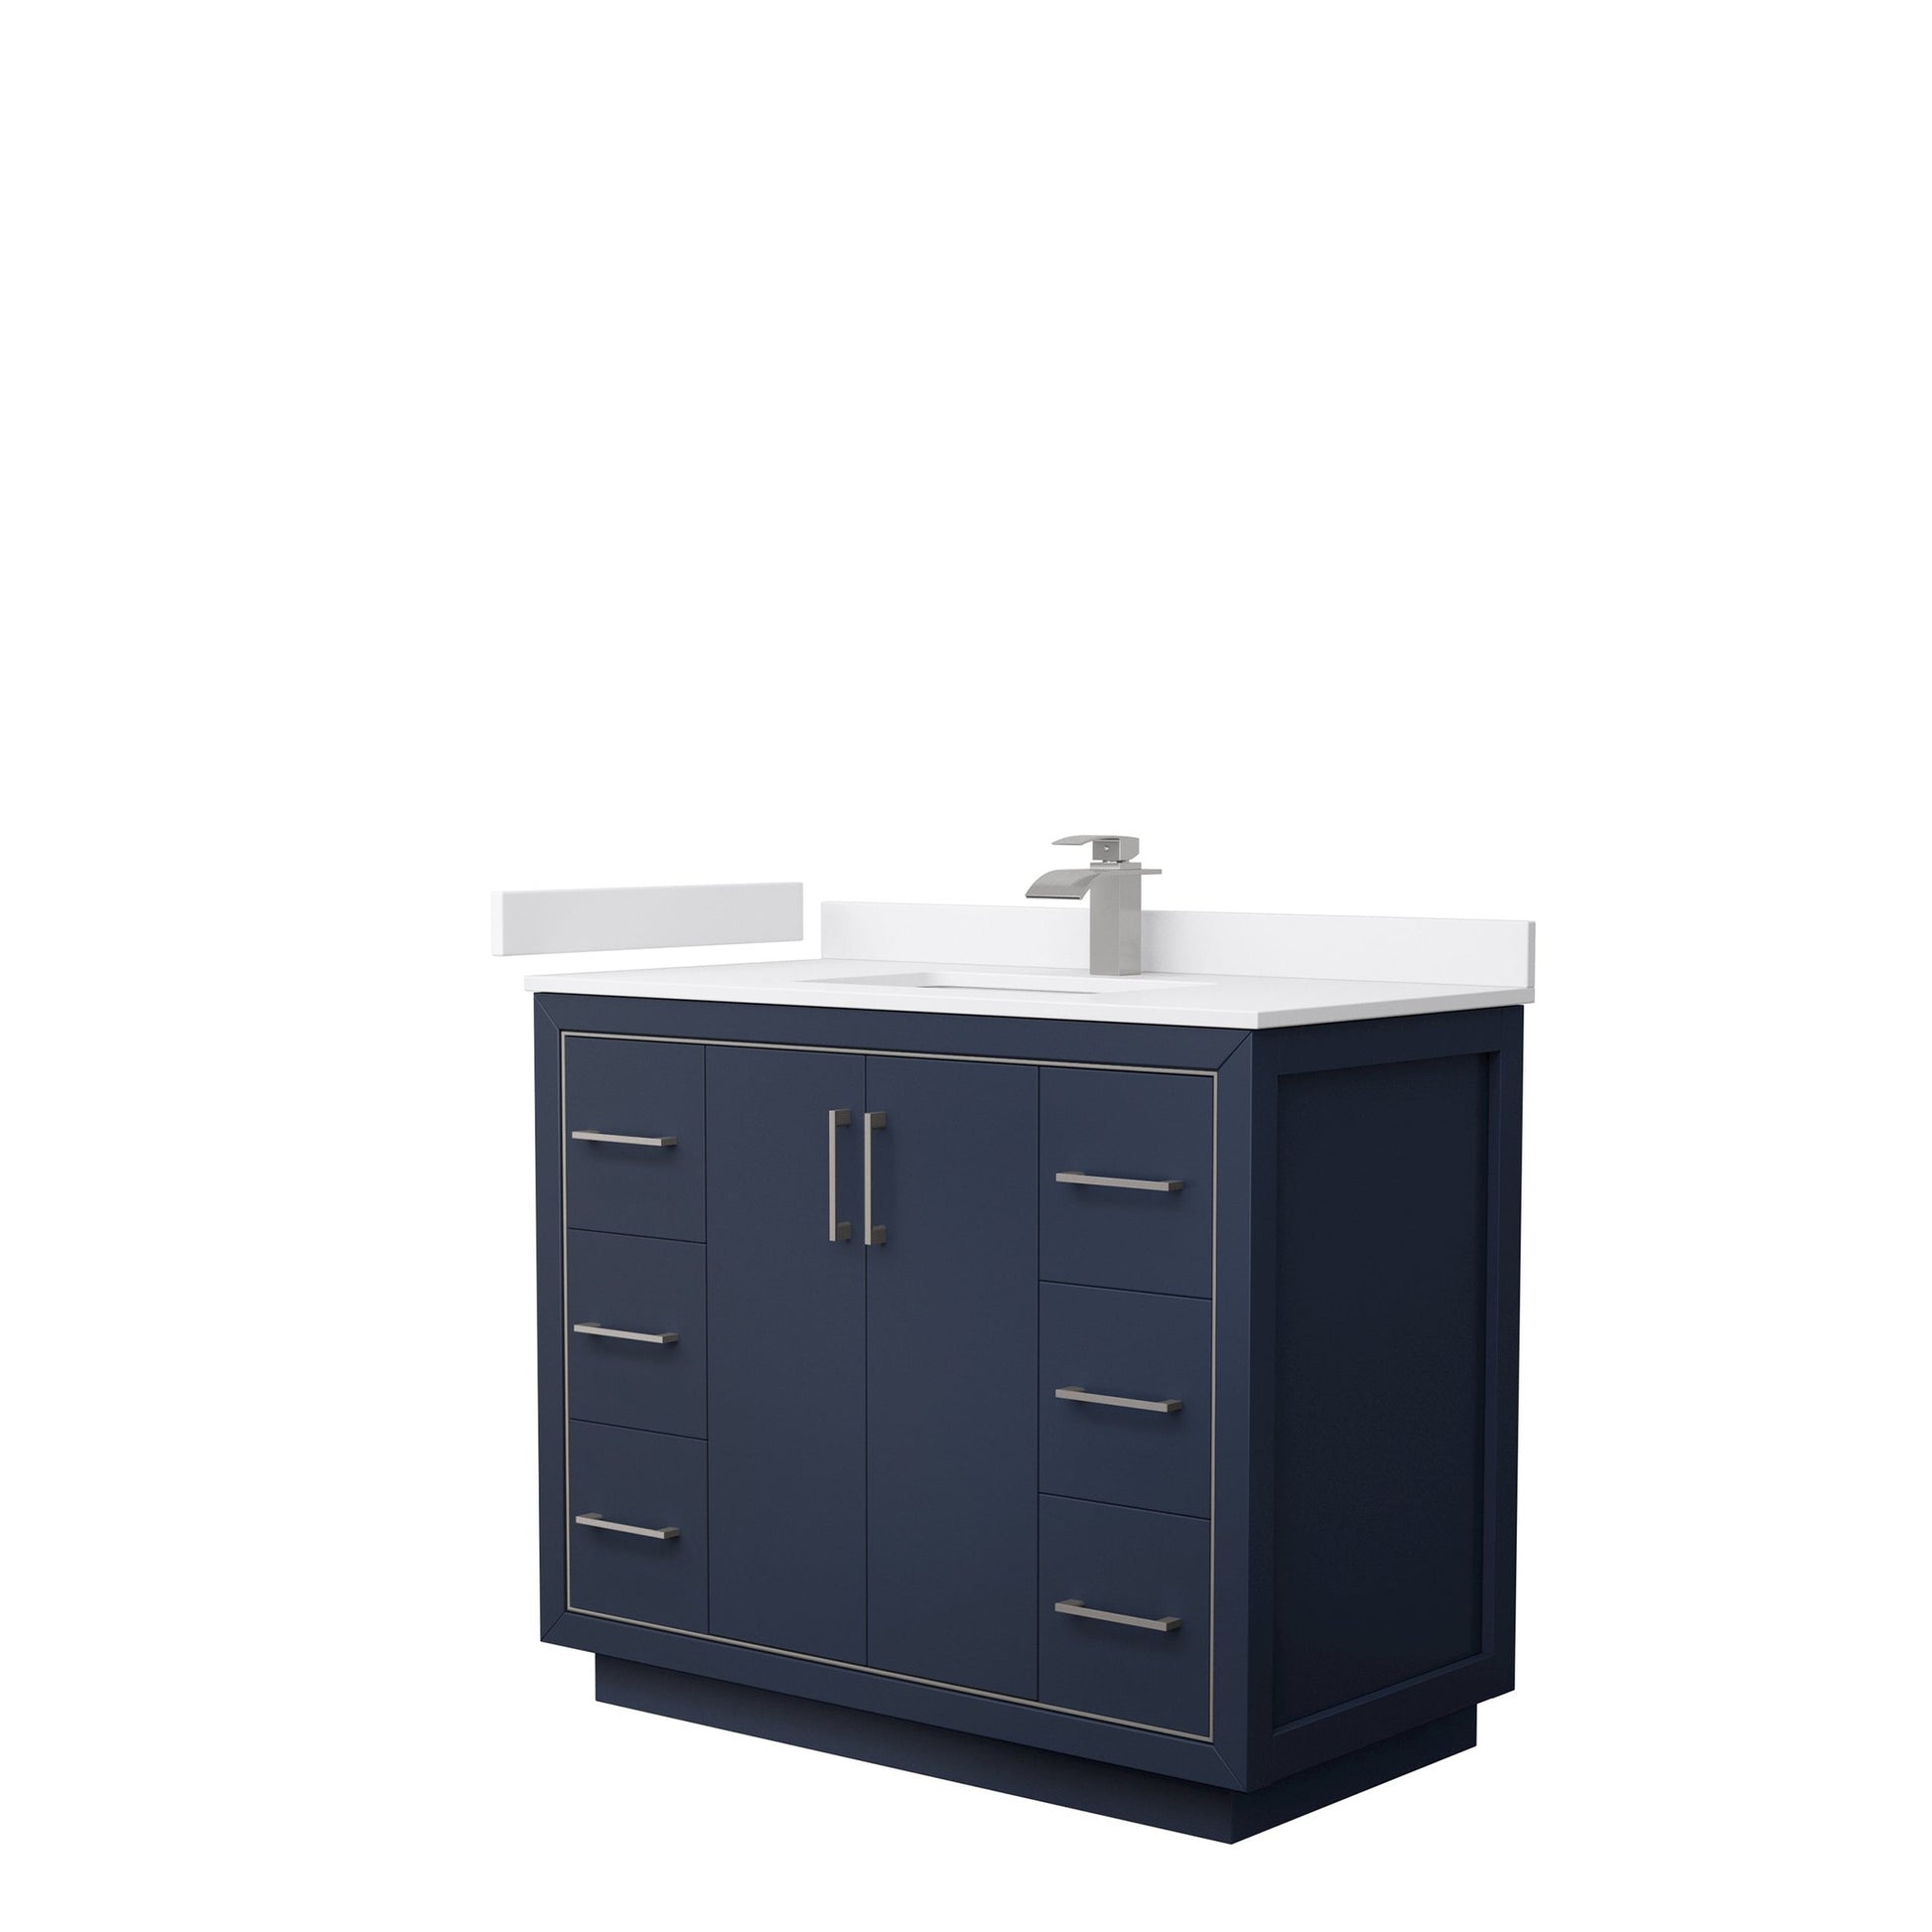 Wyndham Collection Icon 42" Single Bathroom Vanity in Dark Blue, White Cultured Marble Countertop, Undermount Square Sink, Brushed Nickel Trim